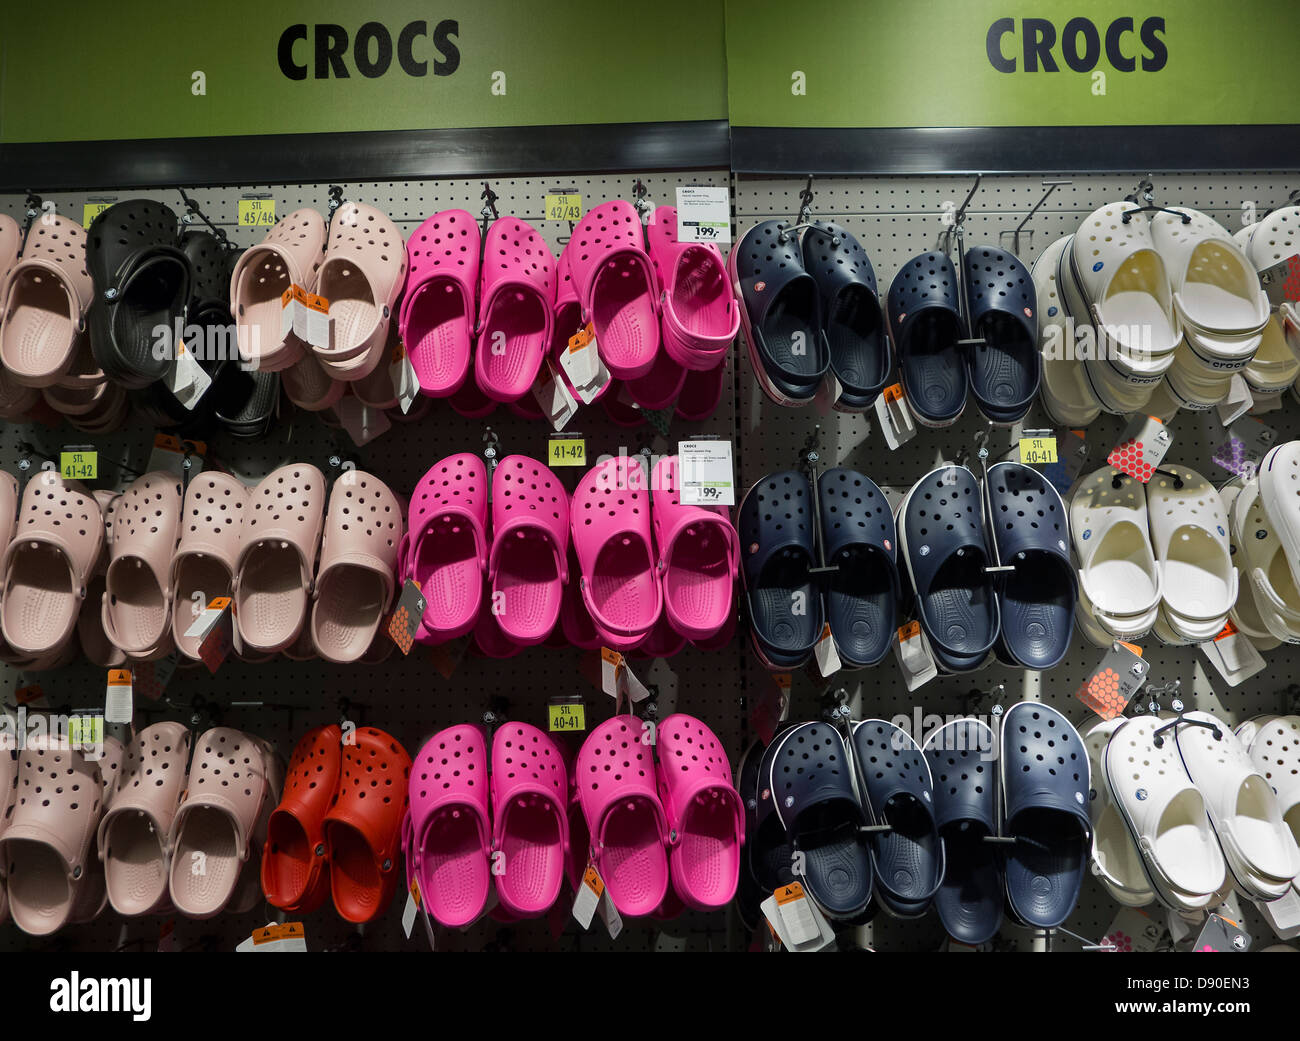 Crocs shoes on display stand in a 